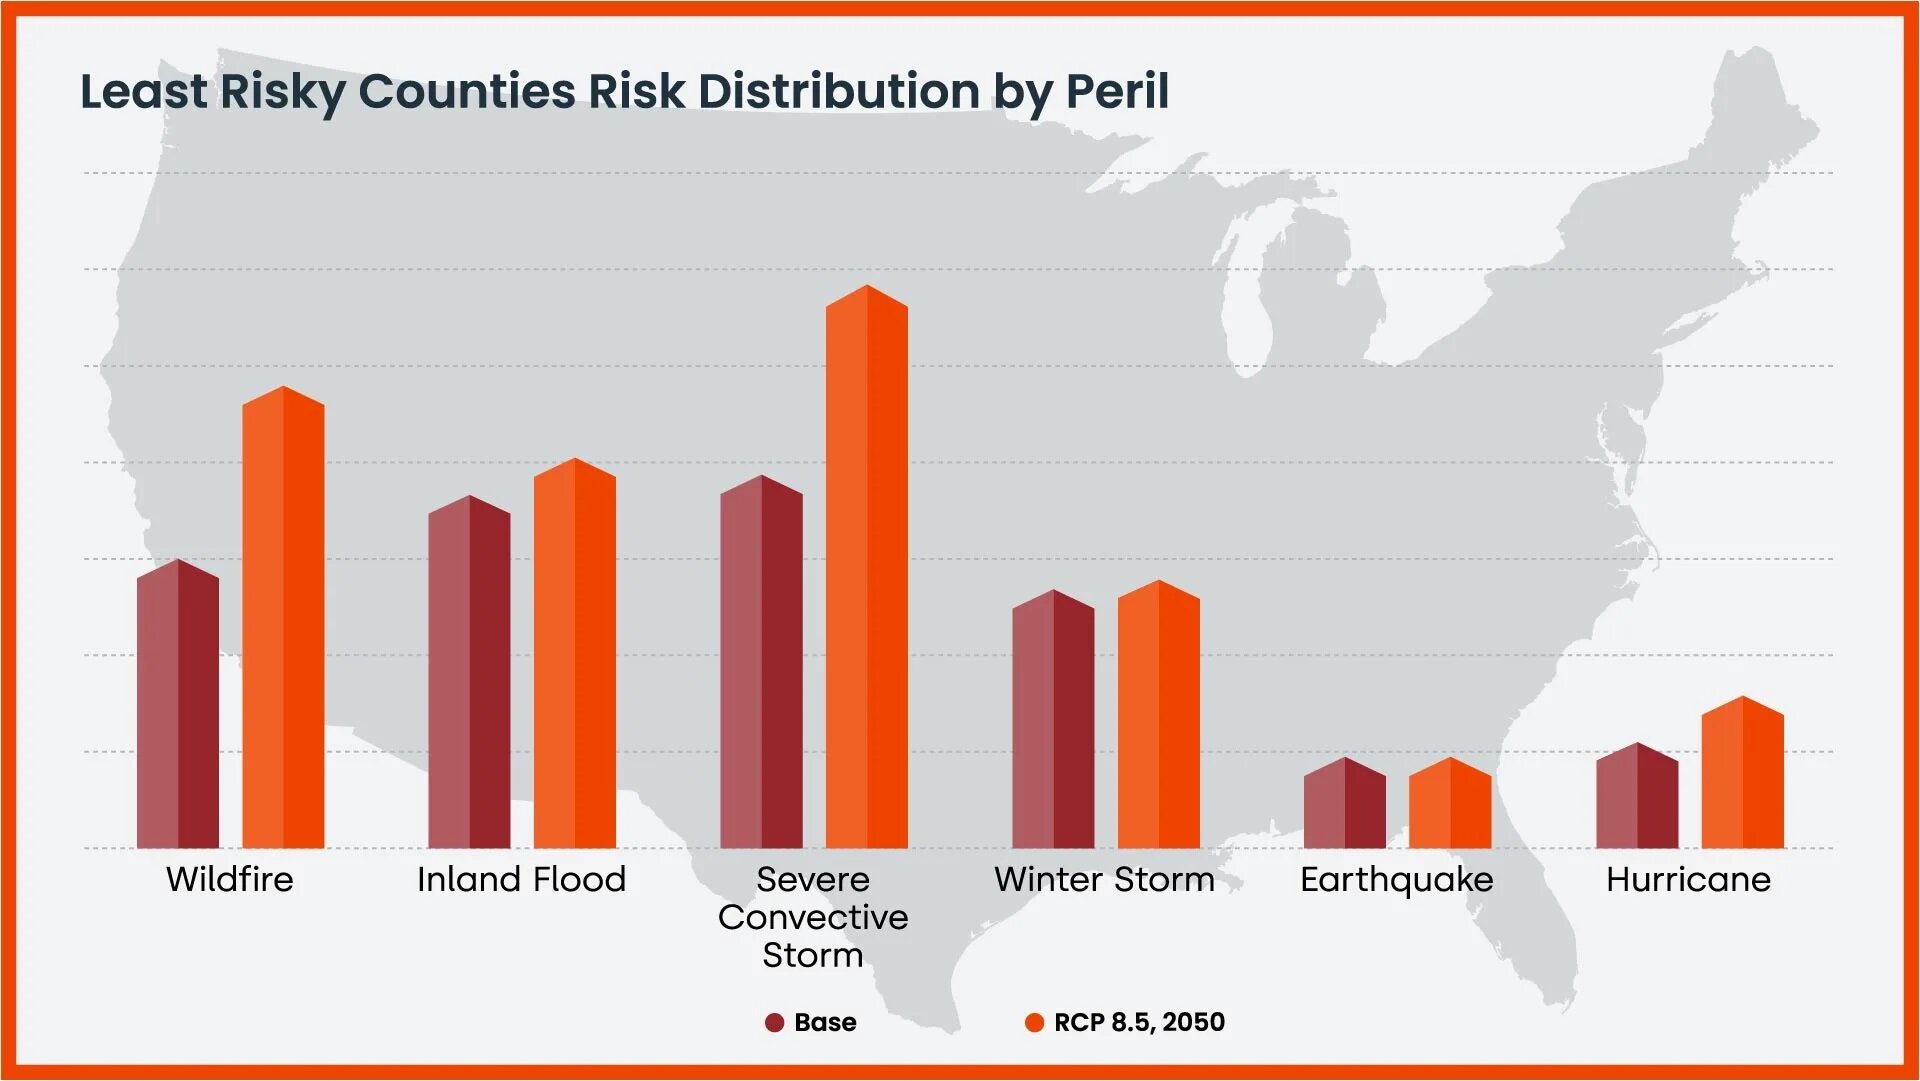 https://www.worldpropertyjournal.com/news-assets-2/BAR-CHART-least-risk-counties-risk-distribution-by-peril.jpg